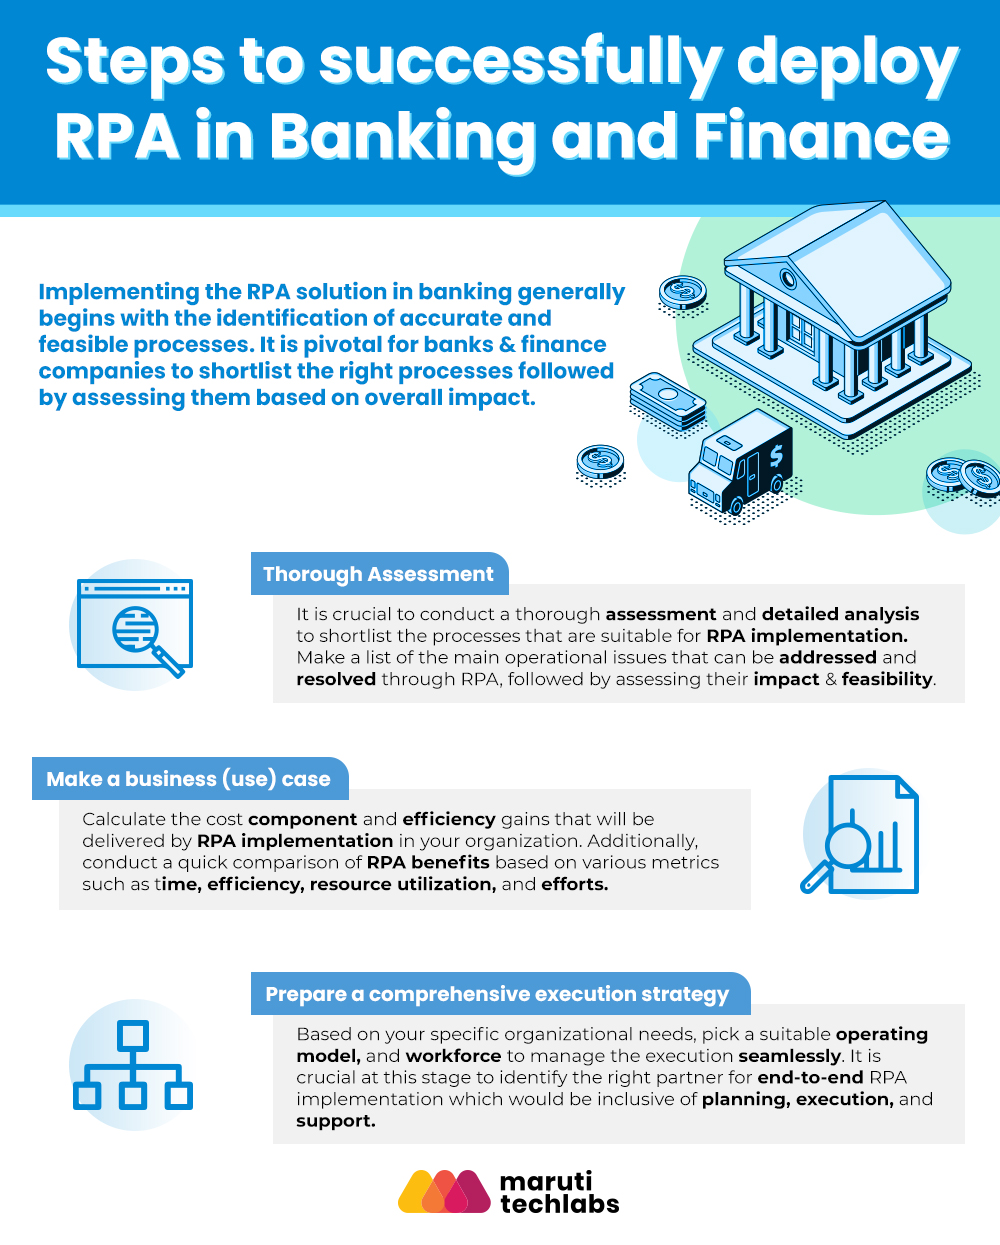 How to deploy RPA in Banking and Finance